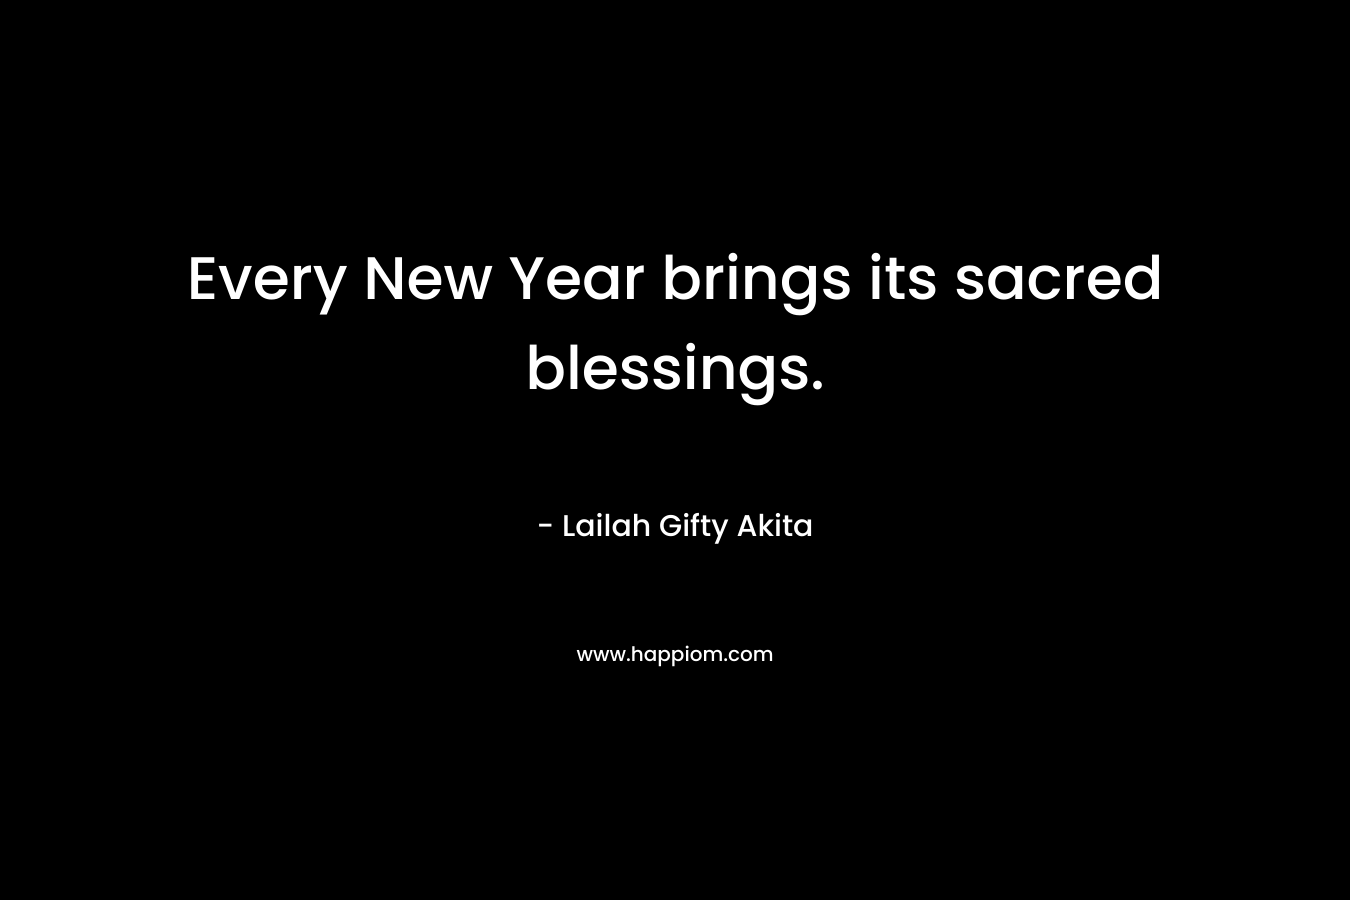 Every New Year brings its sacred blessings.